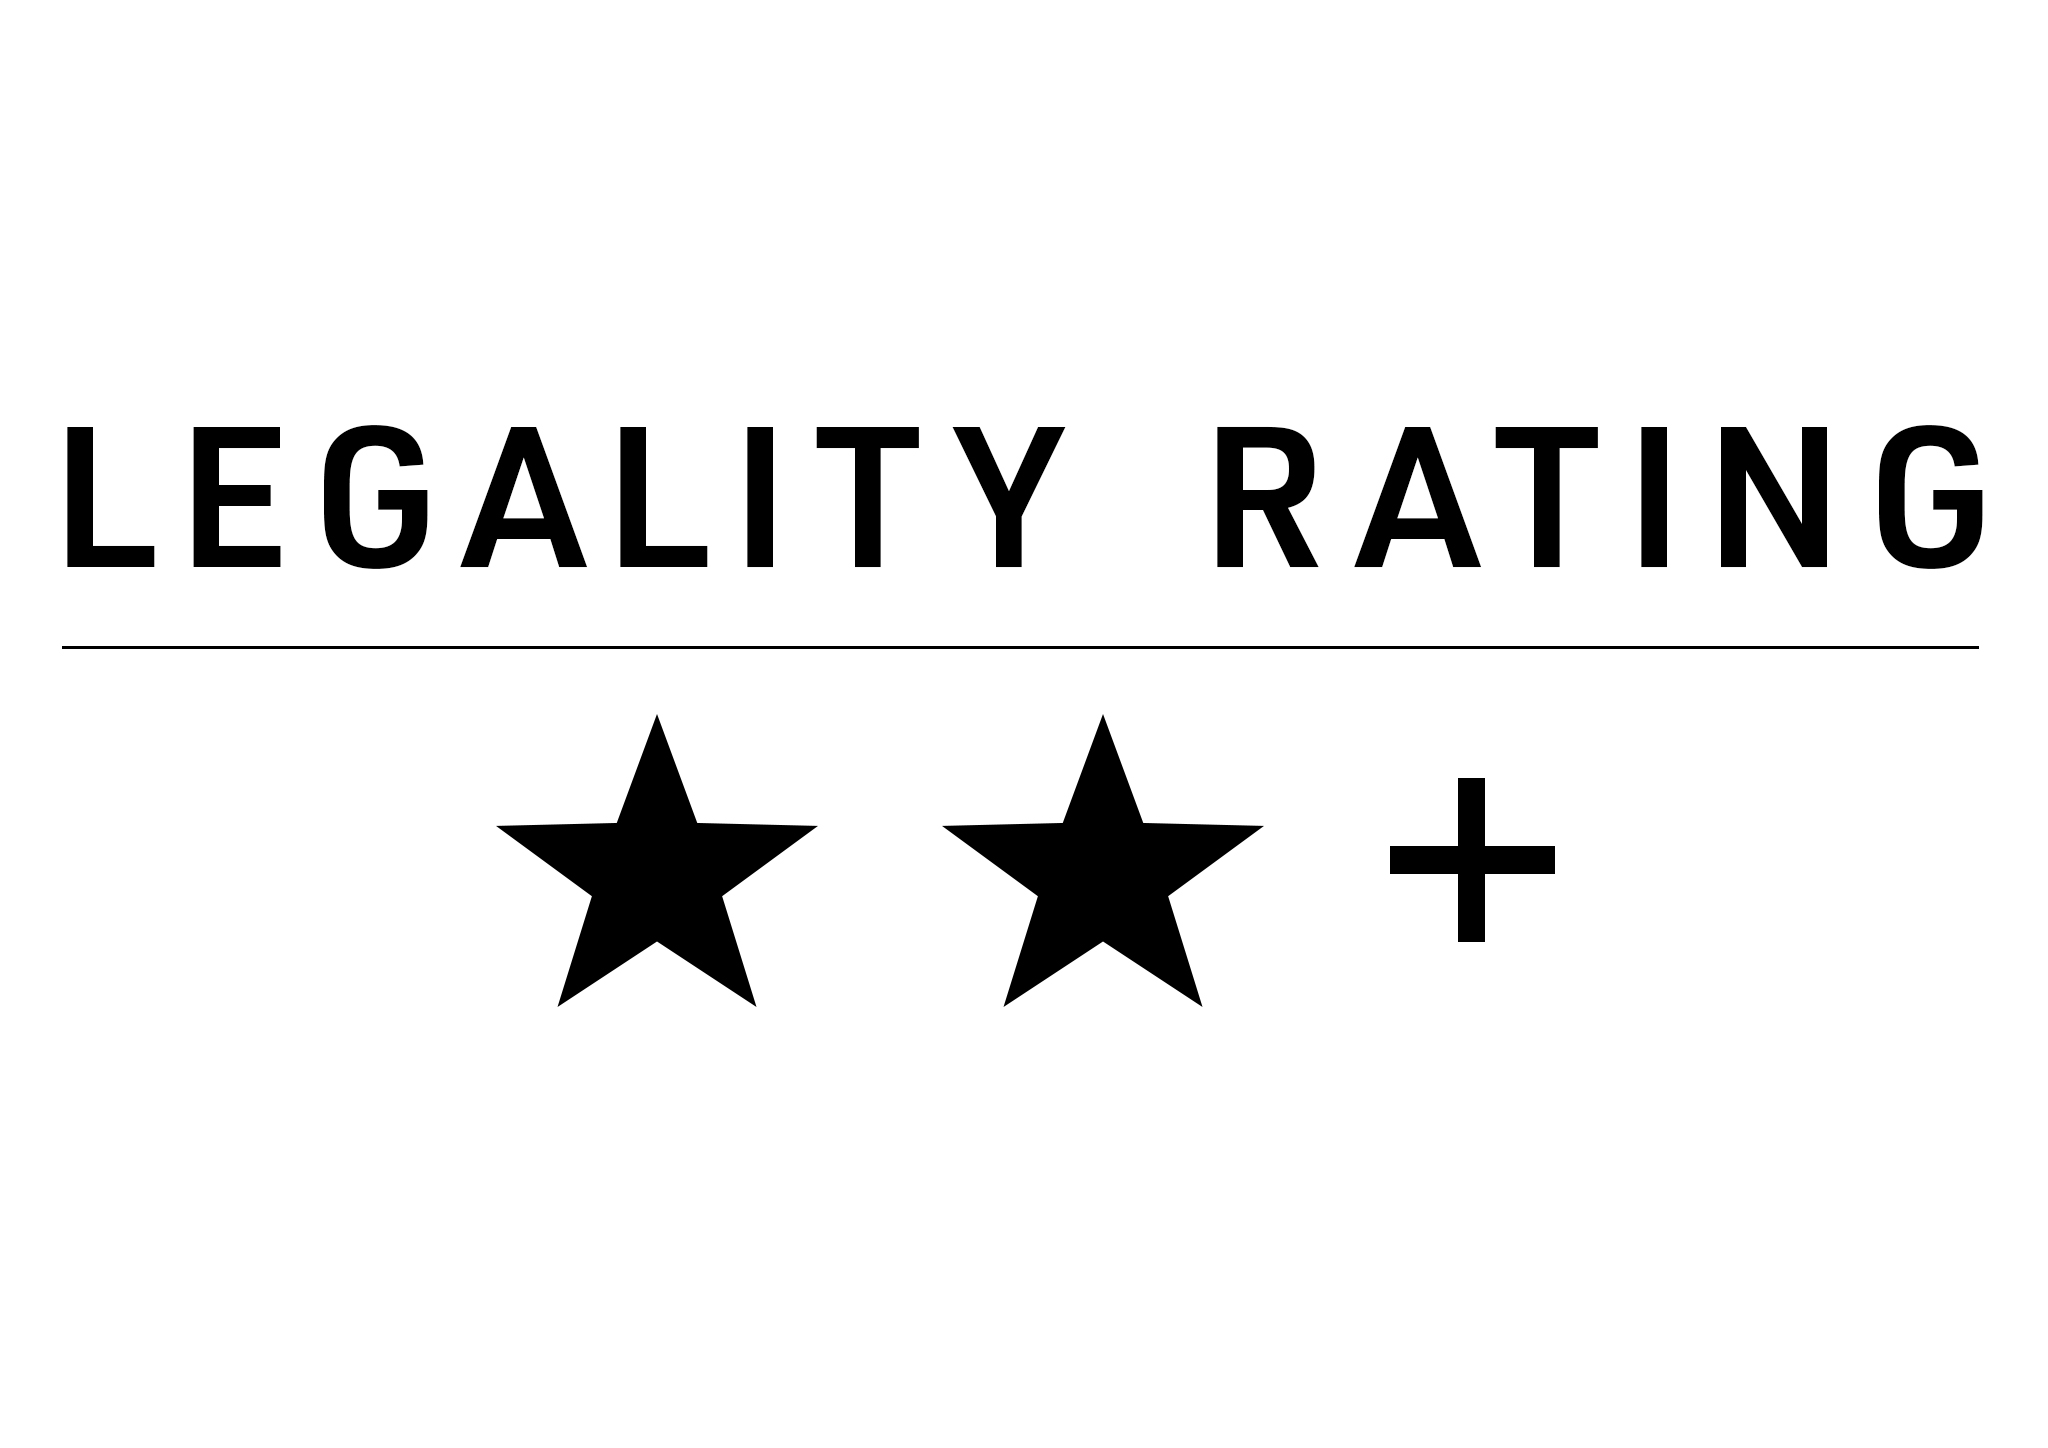 Legality rating